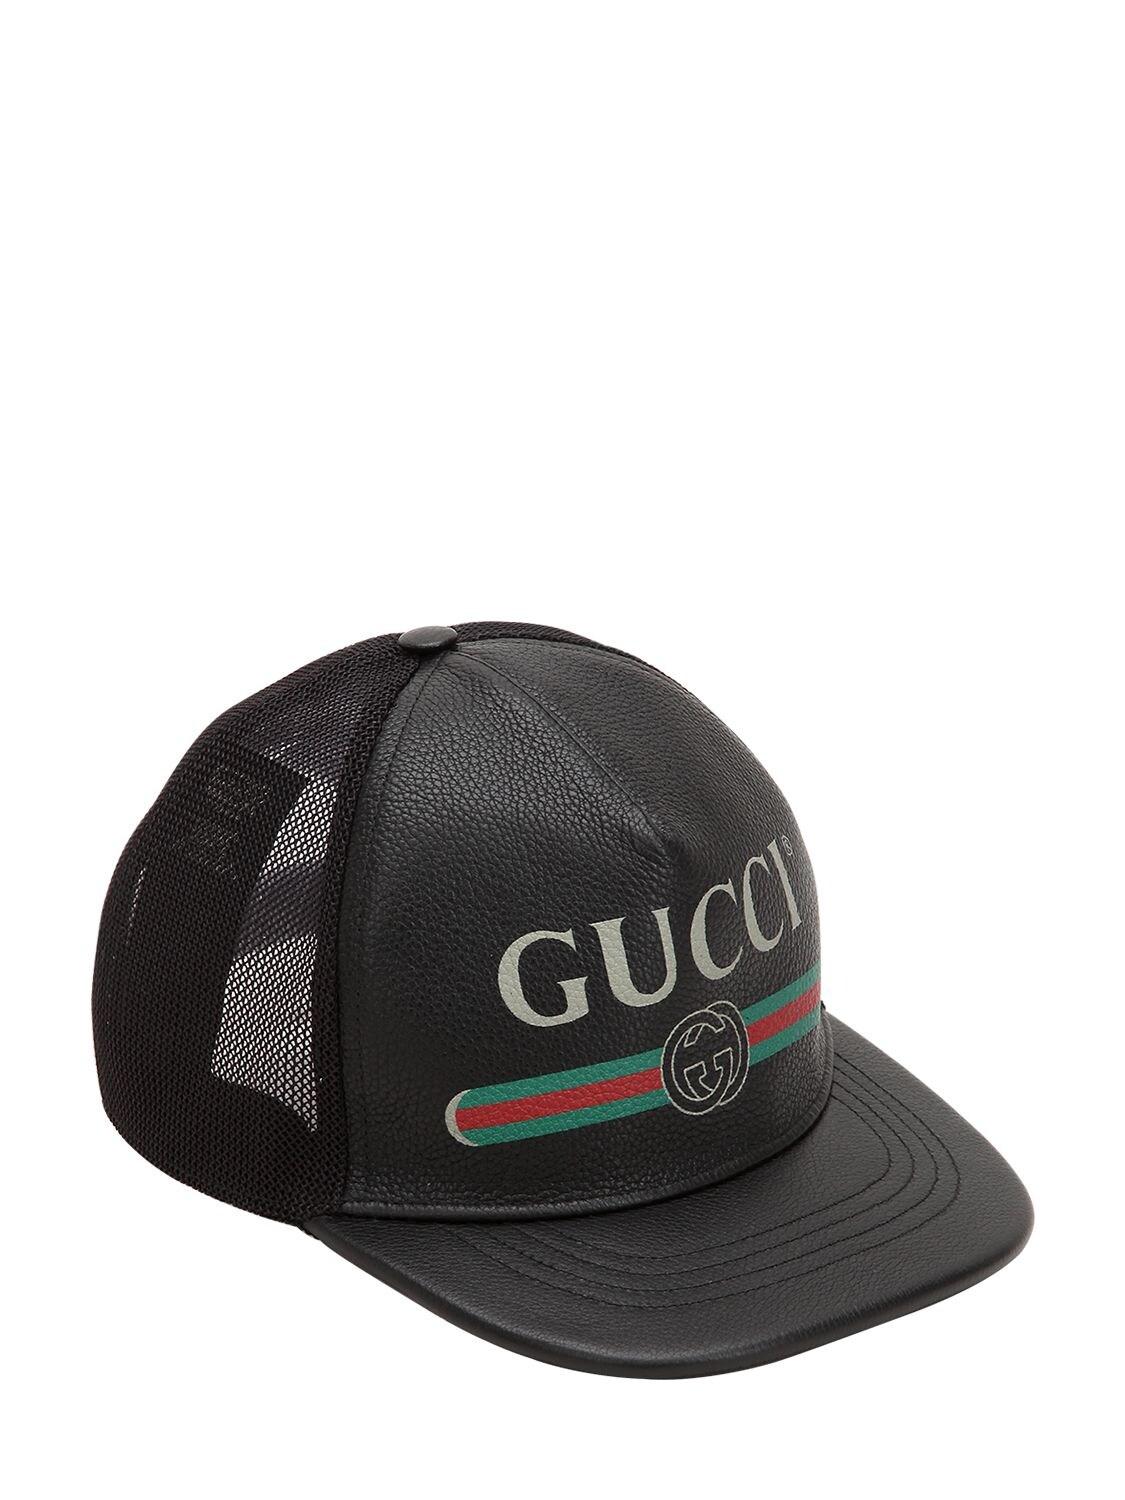 Gucci Fake Logo Leather Cap in White Black Pink (Black) for Men - Lyst